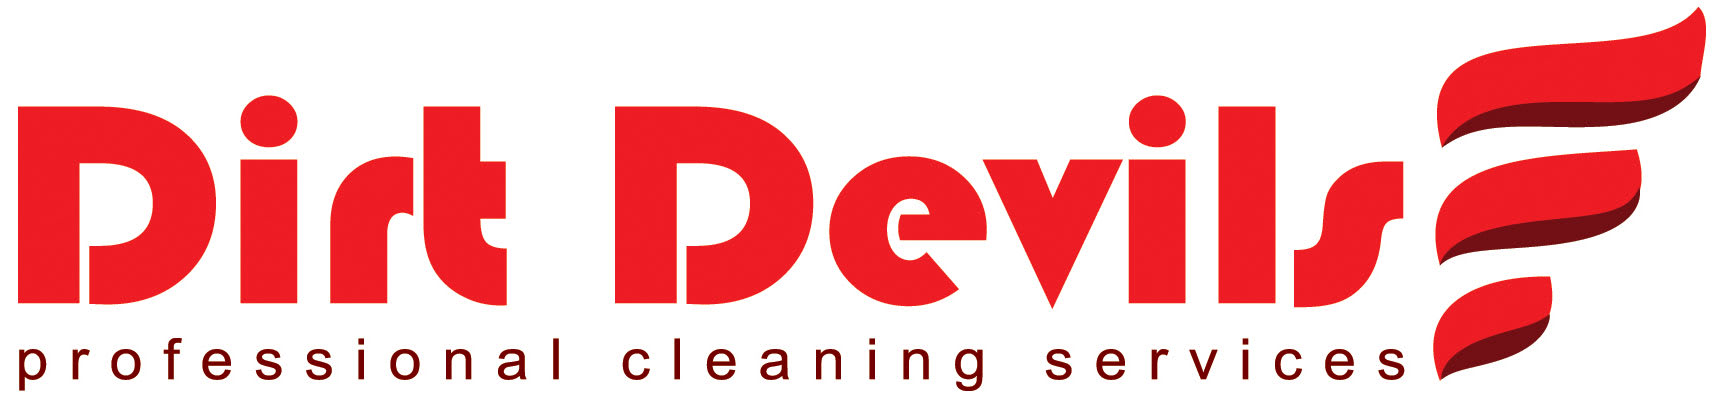 Dirt Devils Professional Cleaning Services